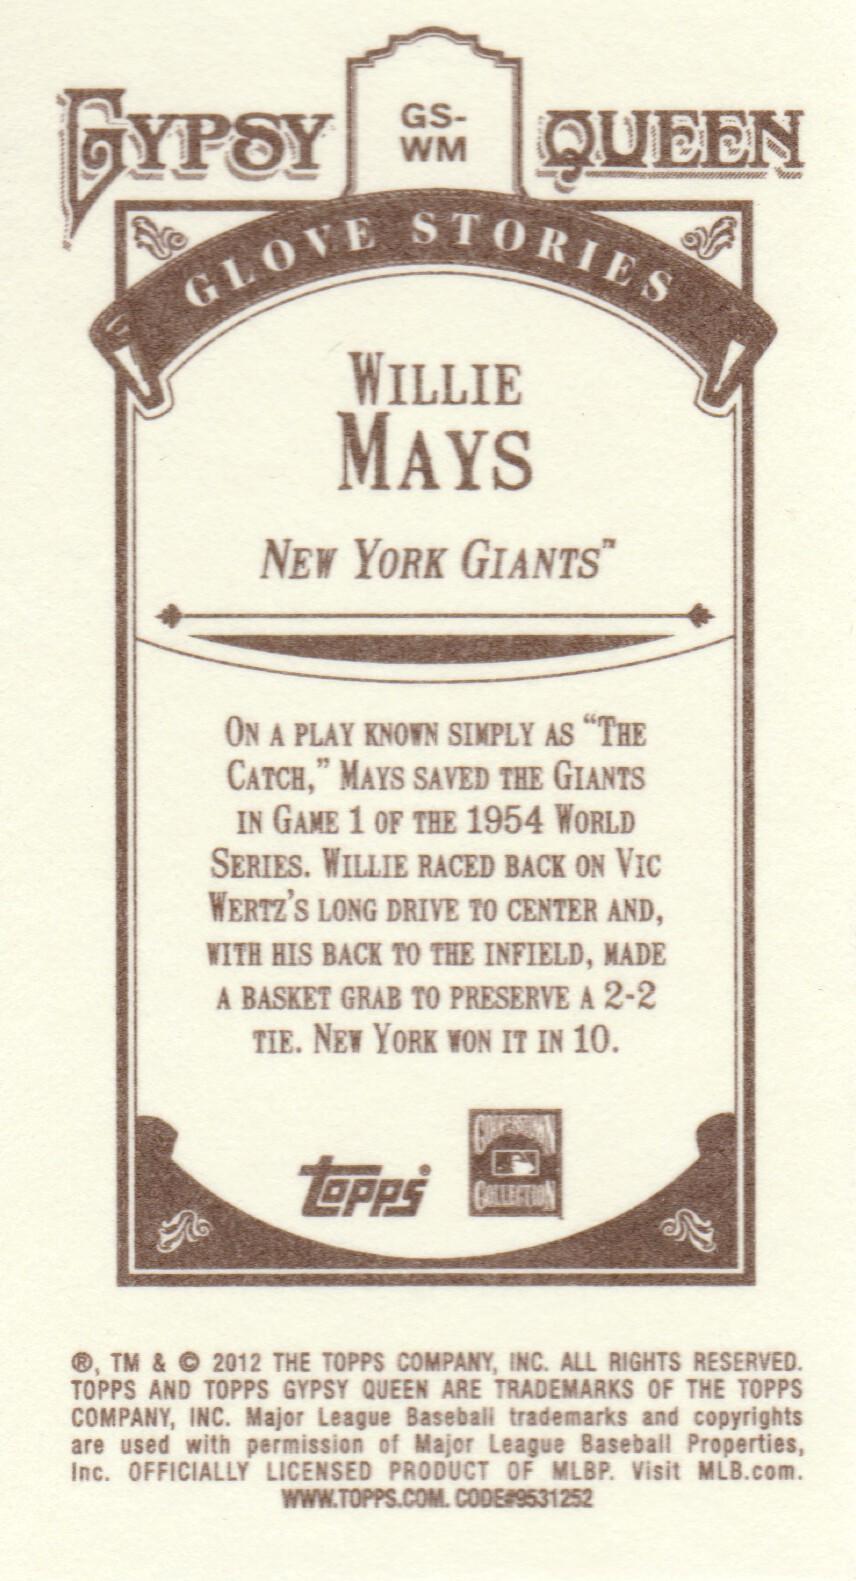 2012 Topps Gypsy Queen Glove Stories Mini #WM Willie Mays back image